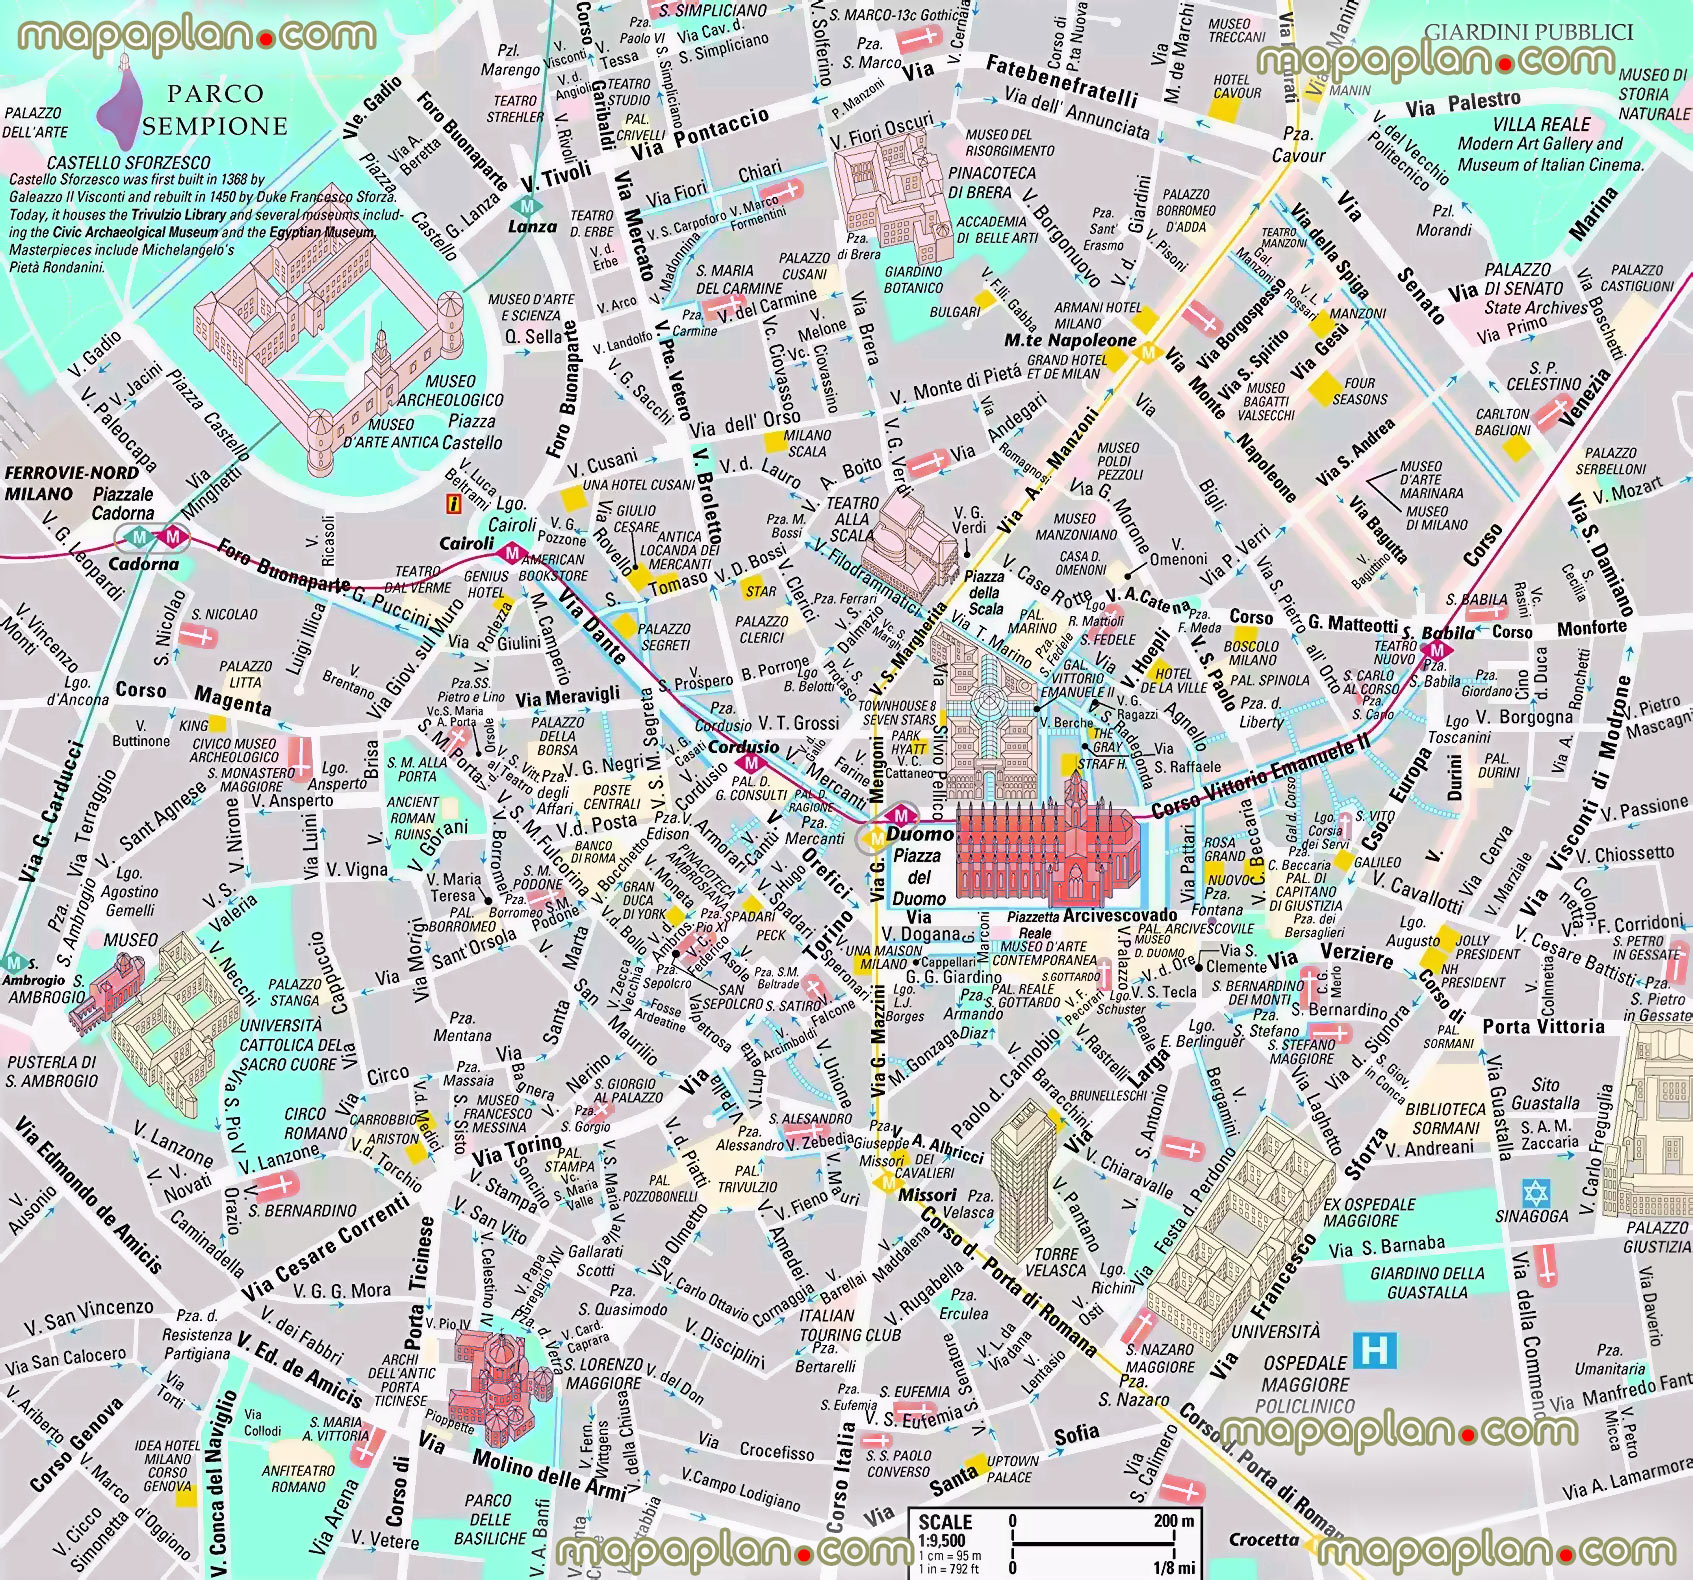 milan inner city centre top attractions detailed downloadable best historical buildings what see where go directions interesting things do guide englishs Milan Top tourist attractions map